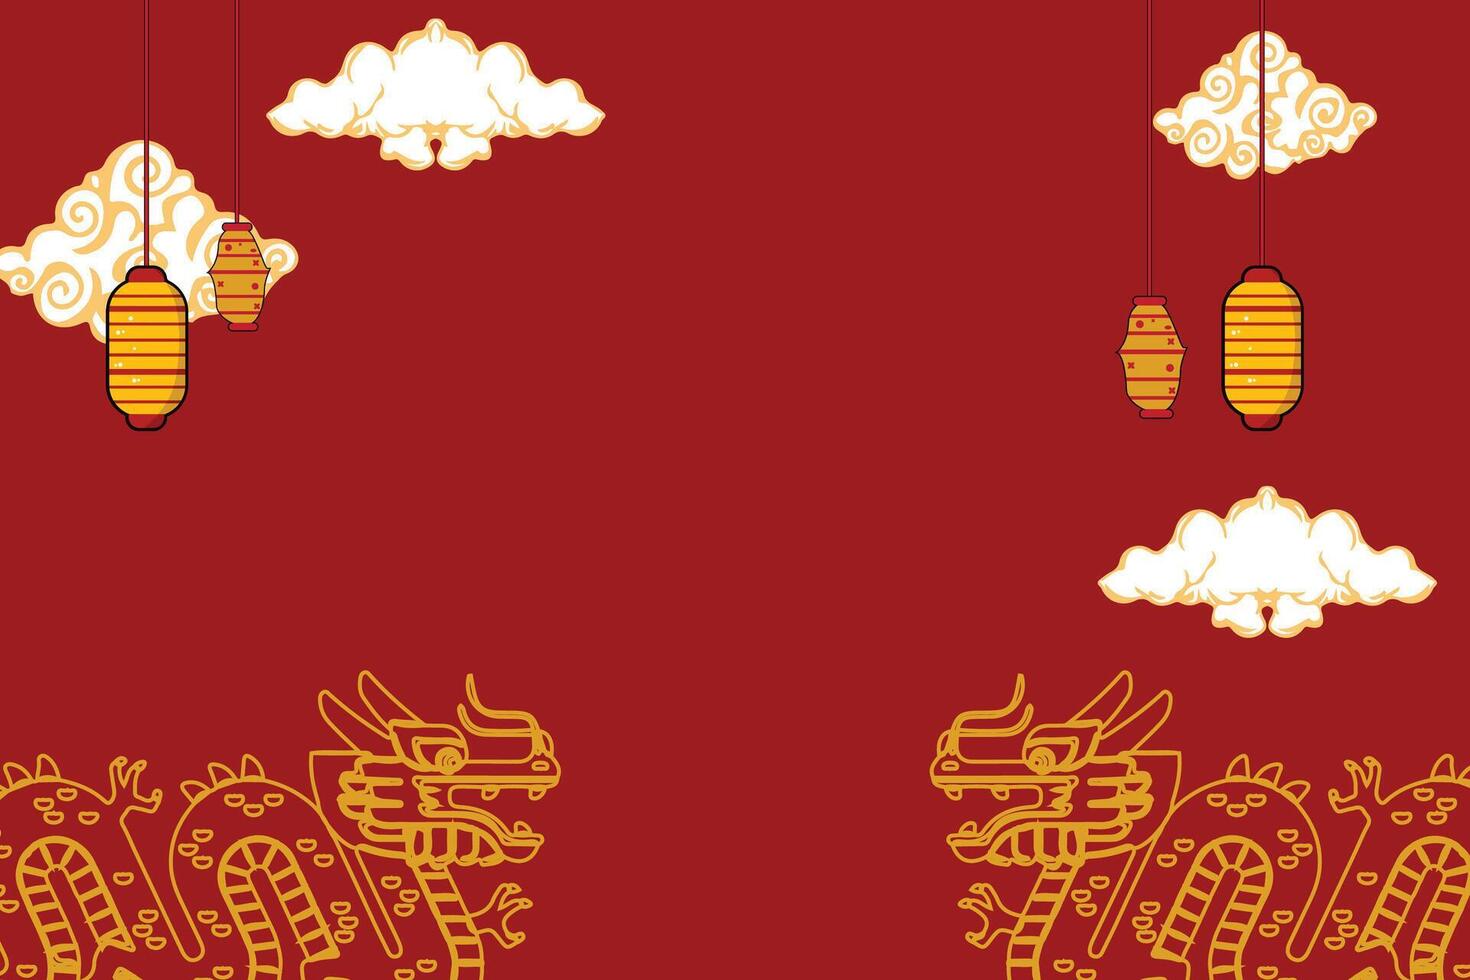 Chinese New Year 2024 with a modern art design style with red and gold Chinese decorations, suitable for posters, banners or social media posts for lunar new year celebrations. vector